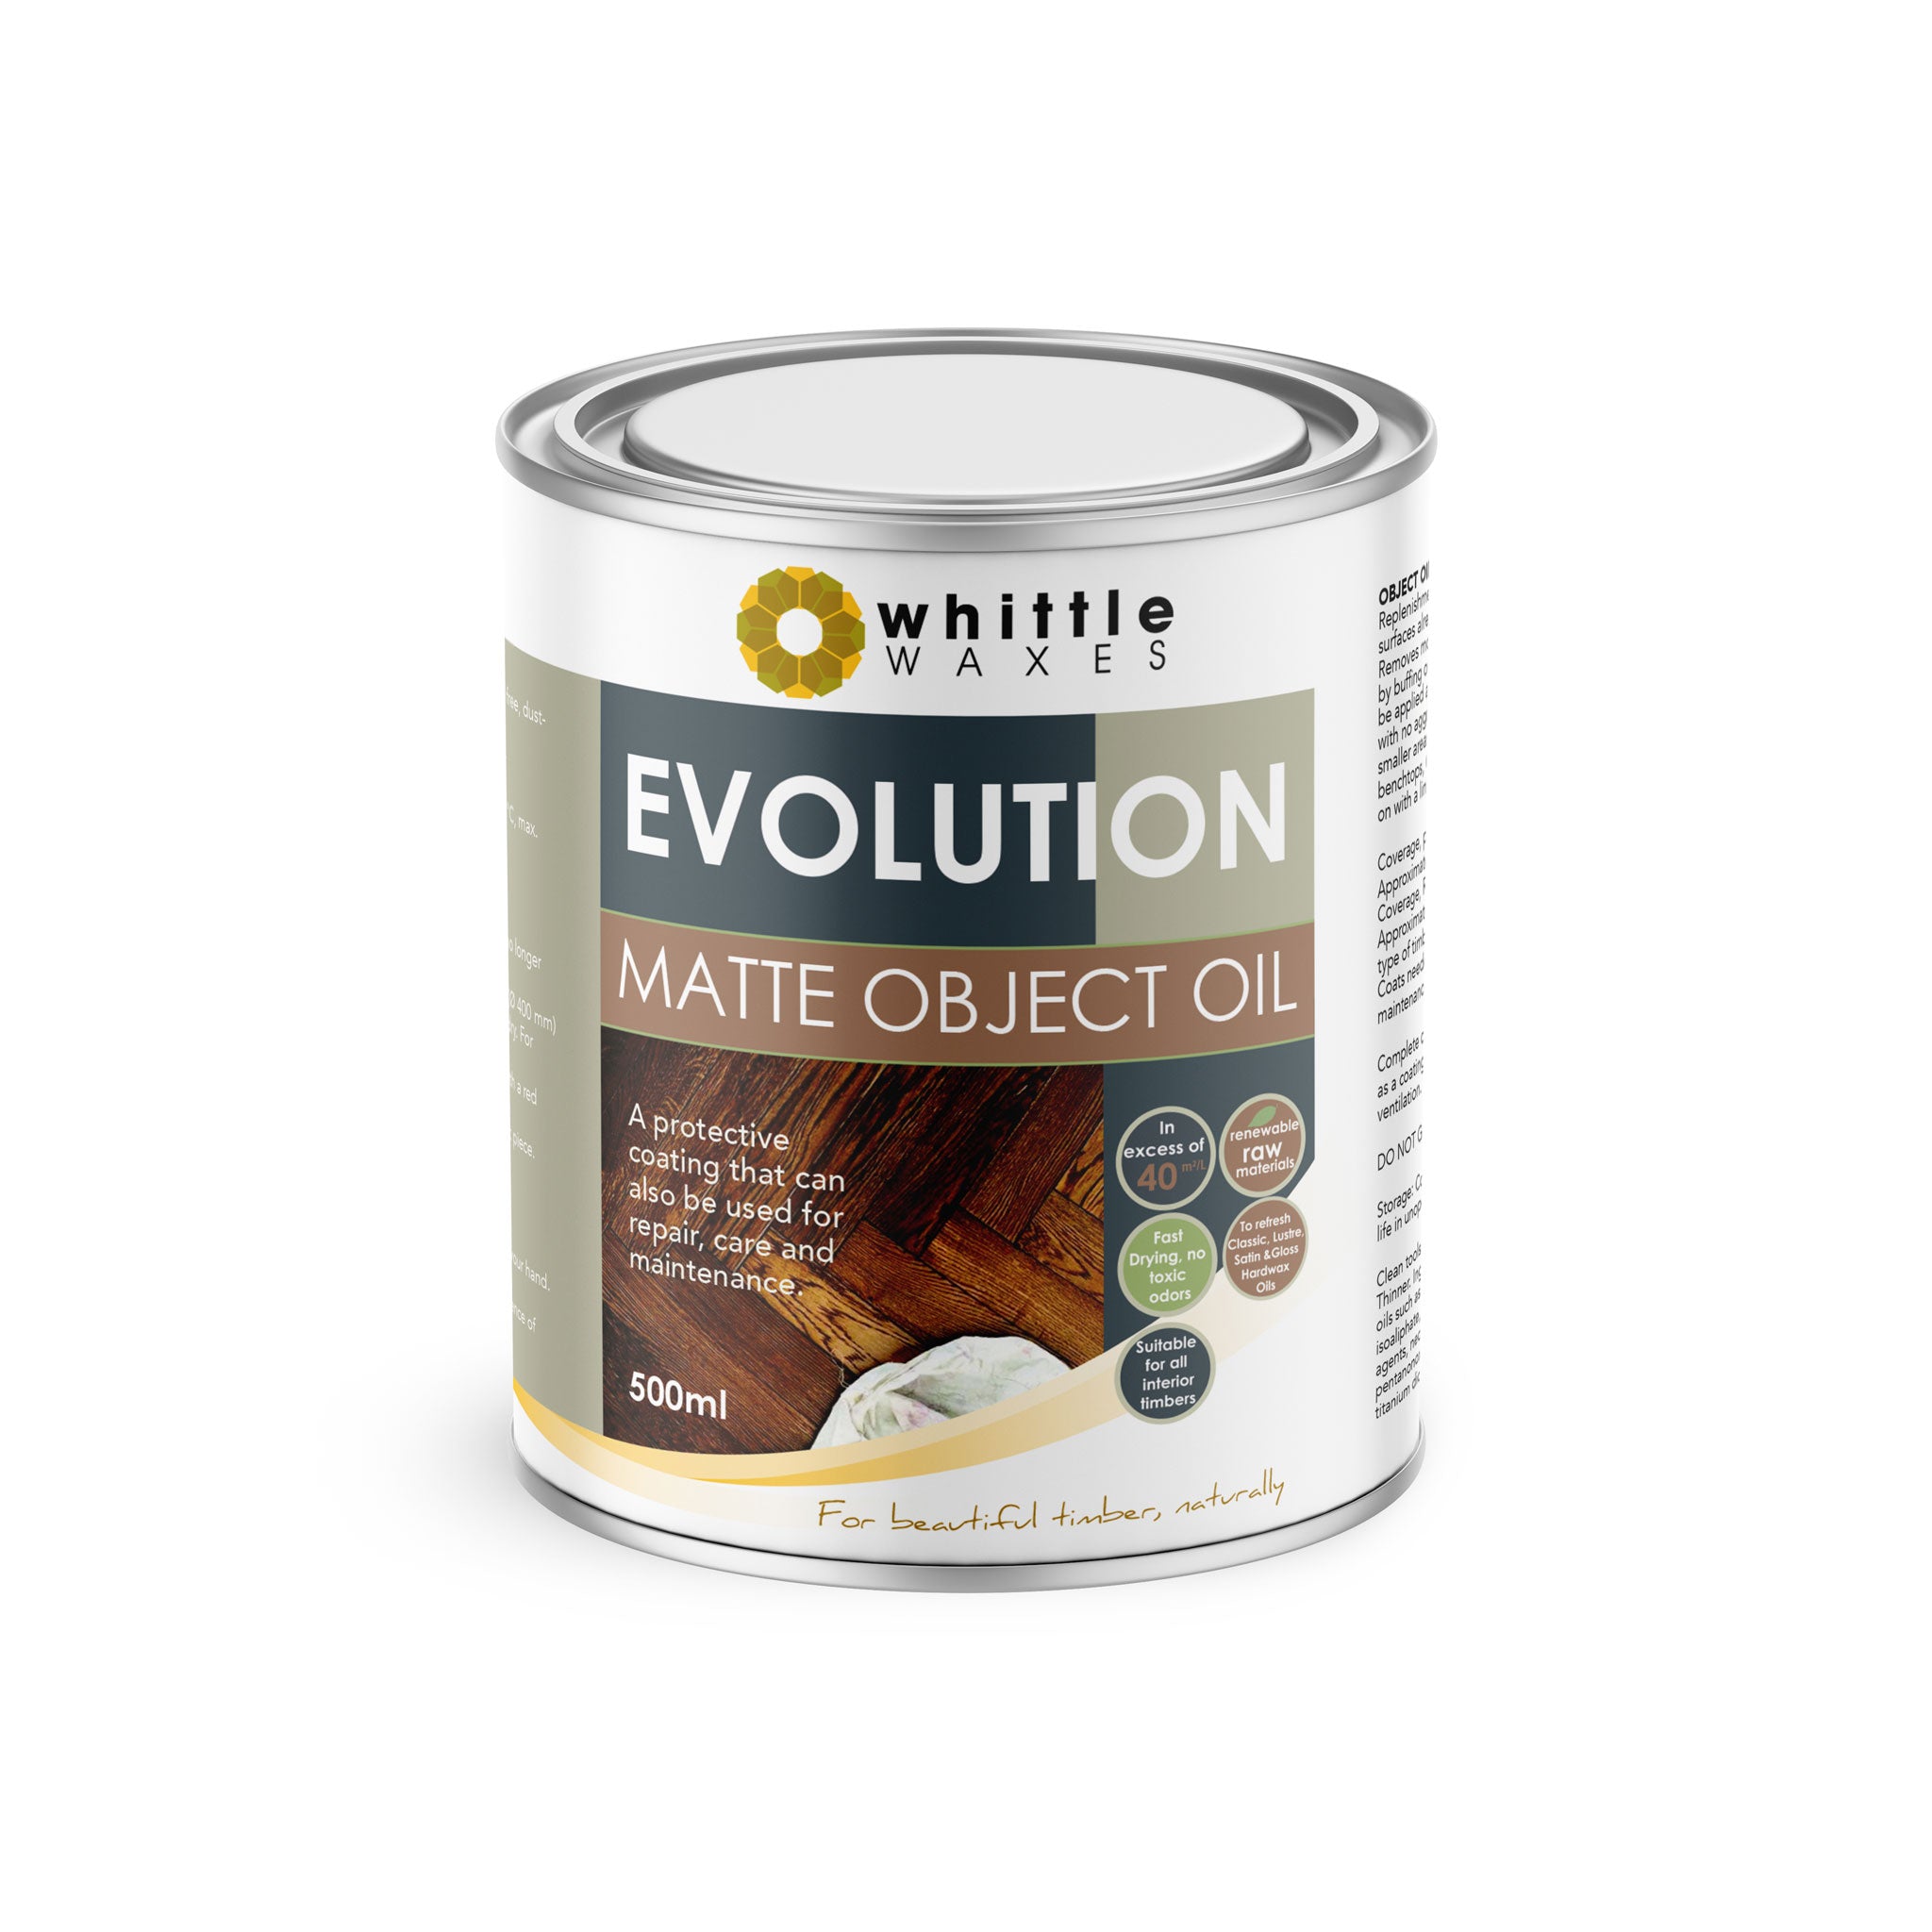 Whittle Waxes Evolution Matte Object Oil - ideal for repair and replenishment - 500ml